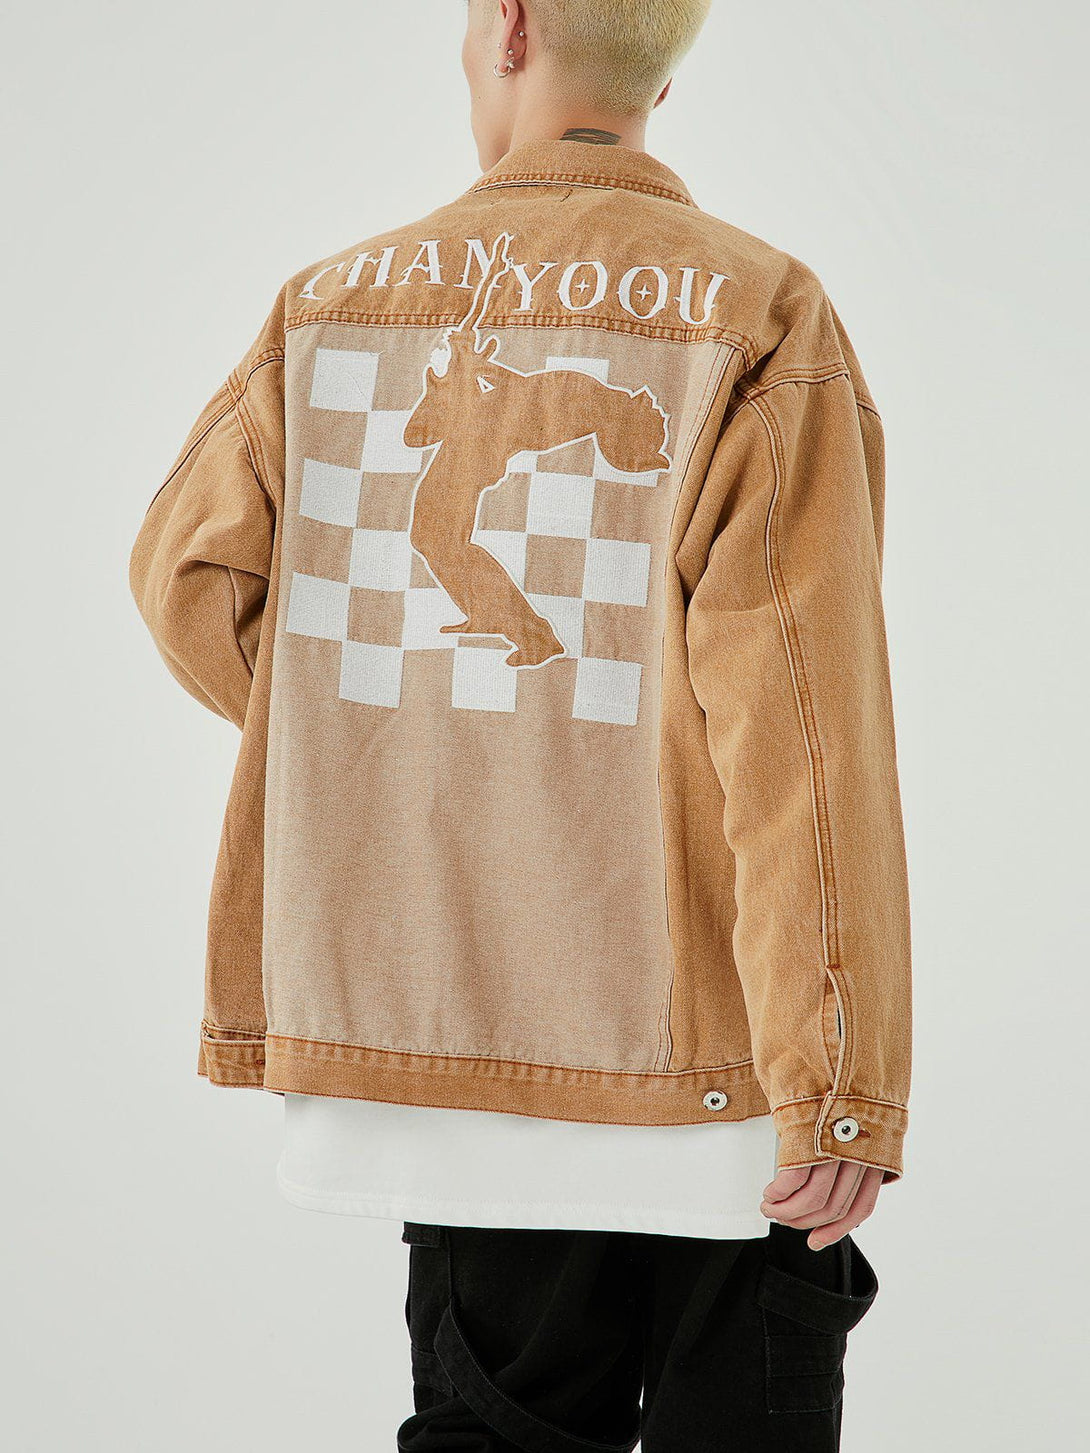 Levefly - Embroidered Checkerboard Denim Jacket - Streetwear Fashion - levefly.com